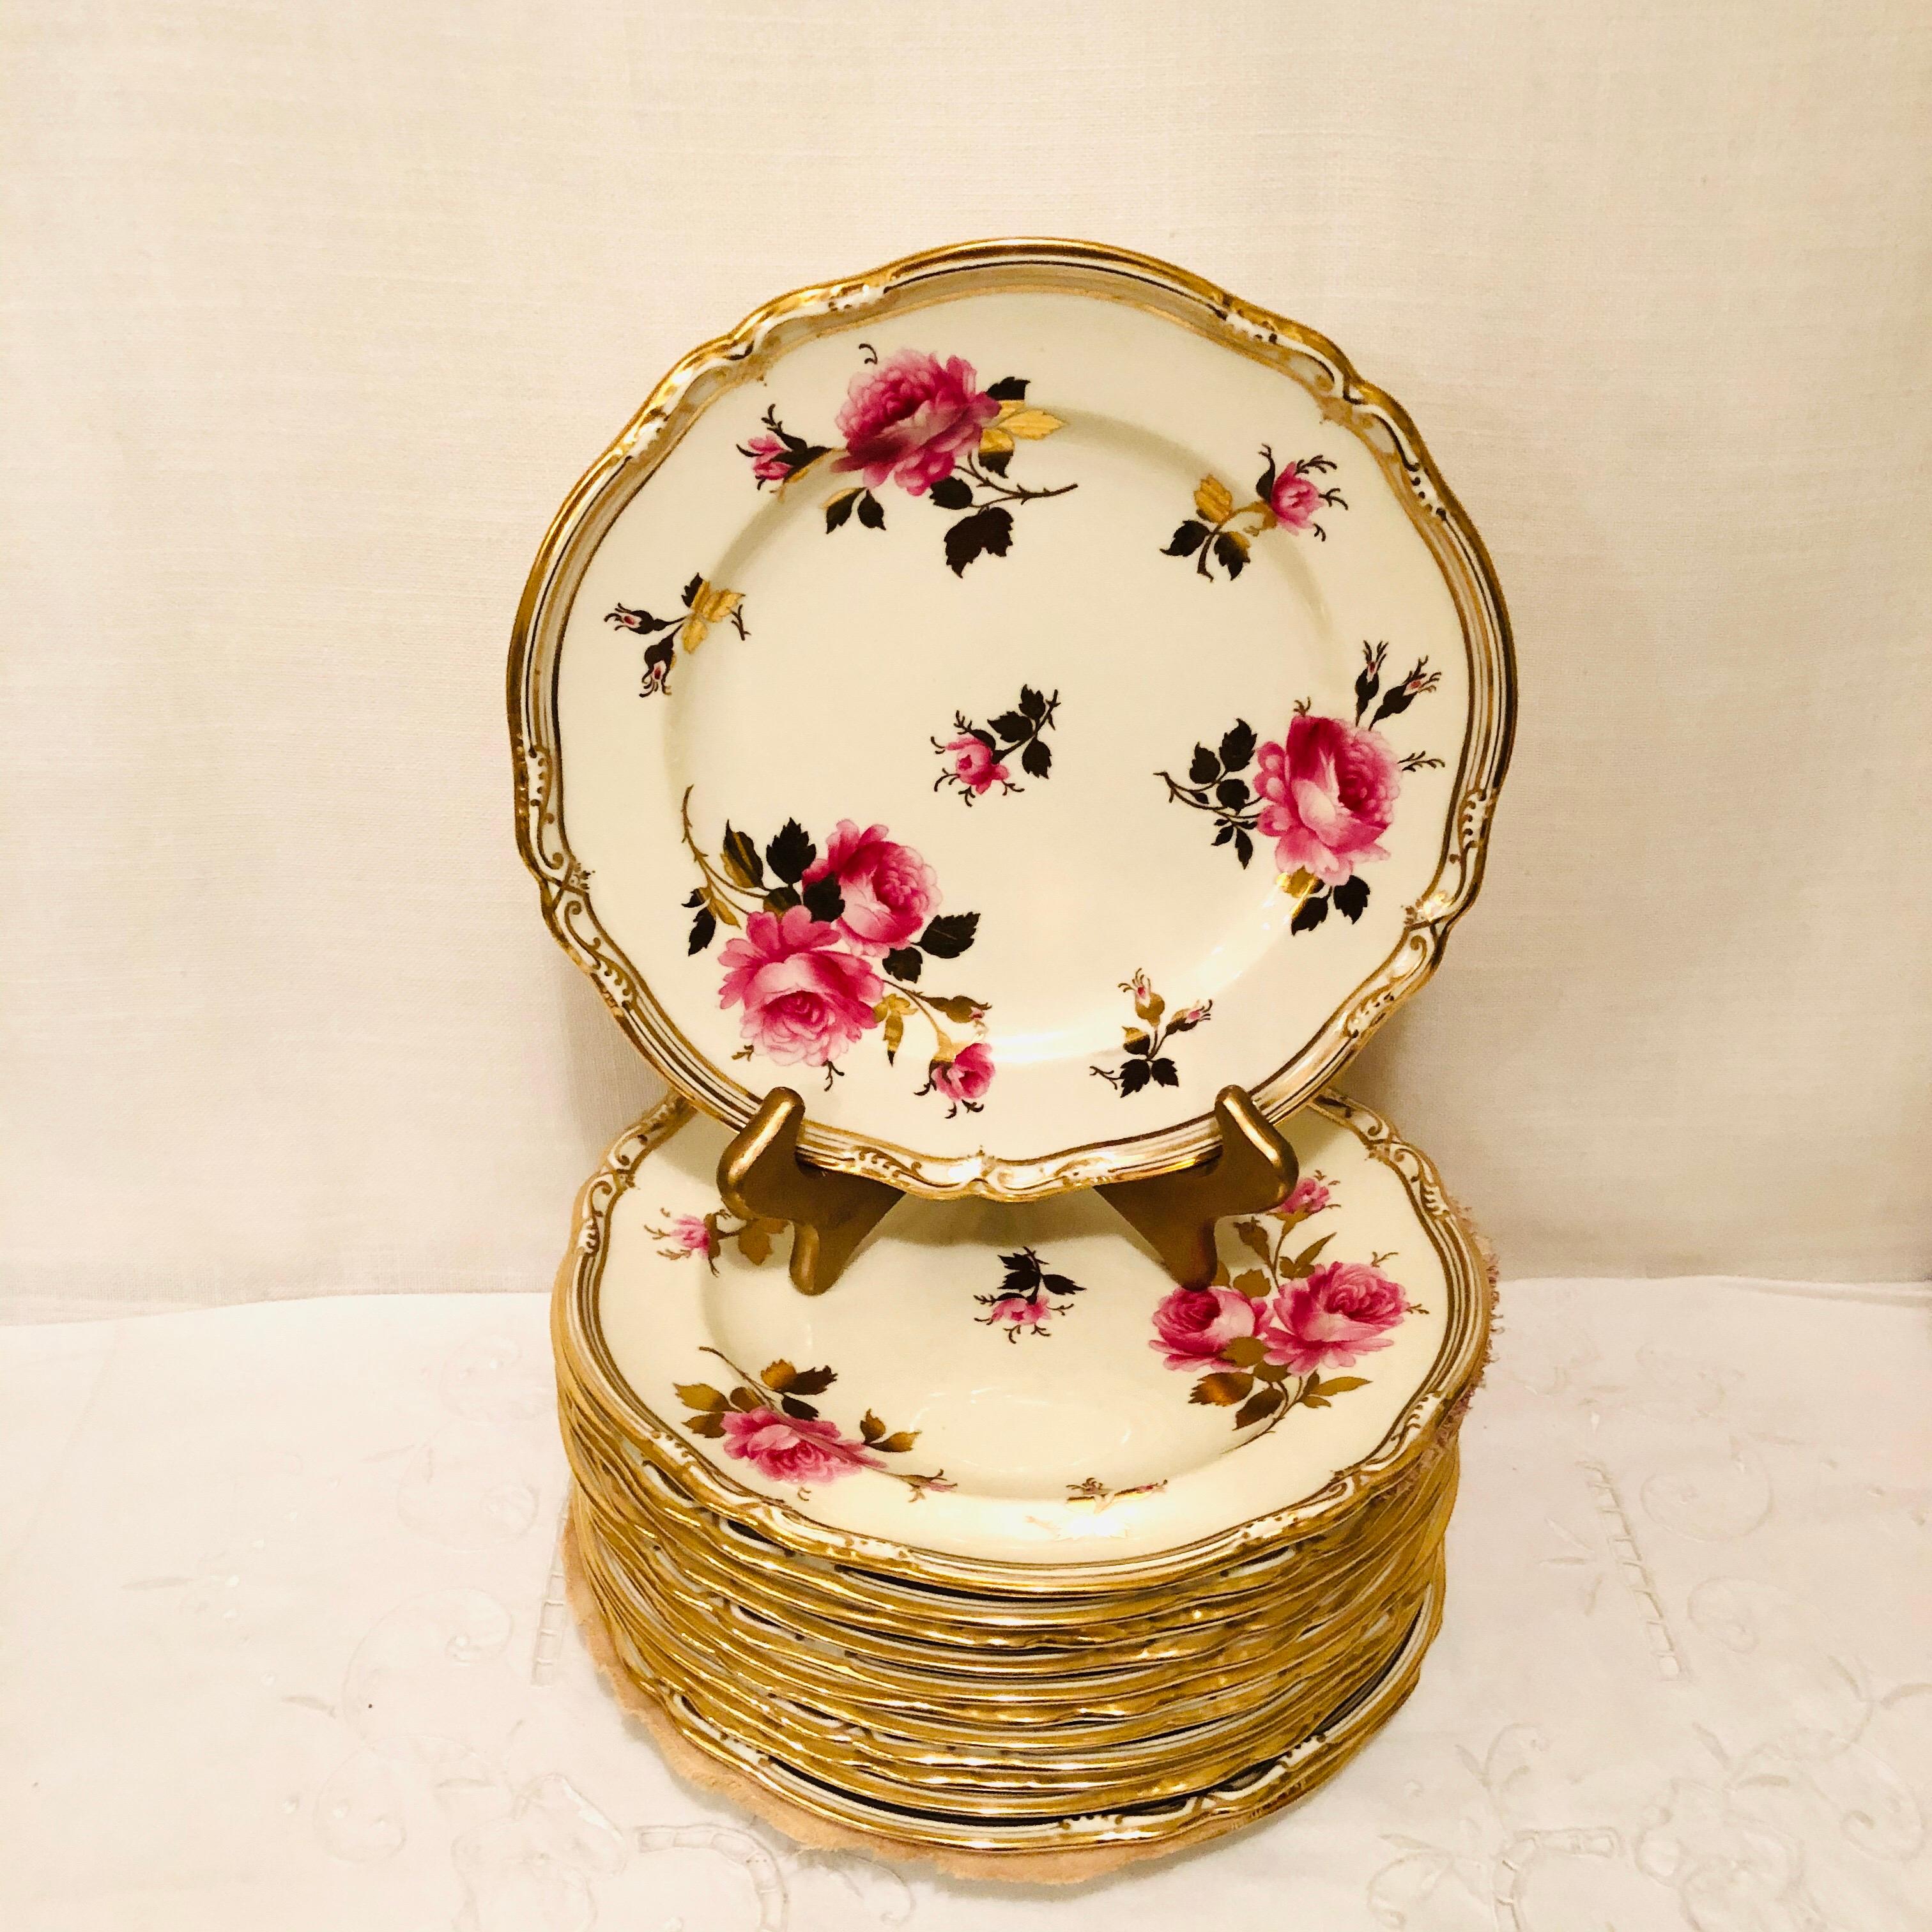 Early 20th Century Spode Made for Tiffany 66 Piece Dinner Service Decorated with Large Pink Roses